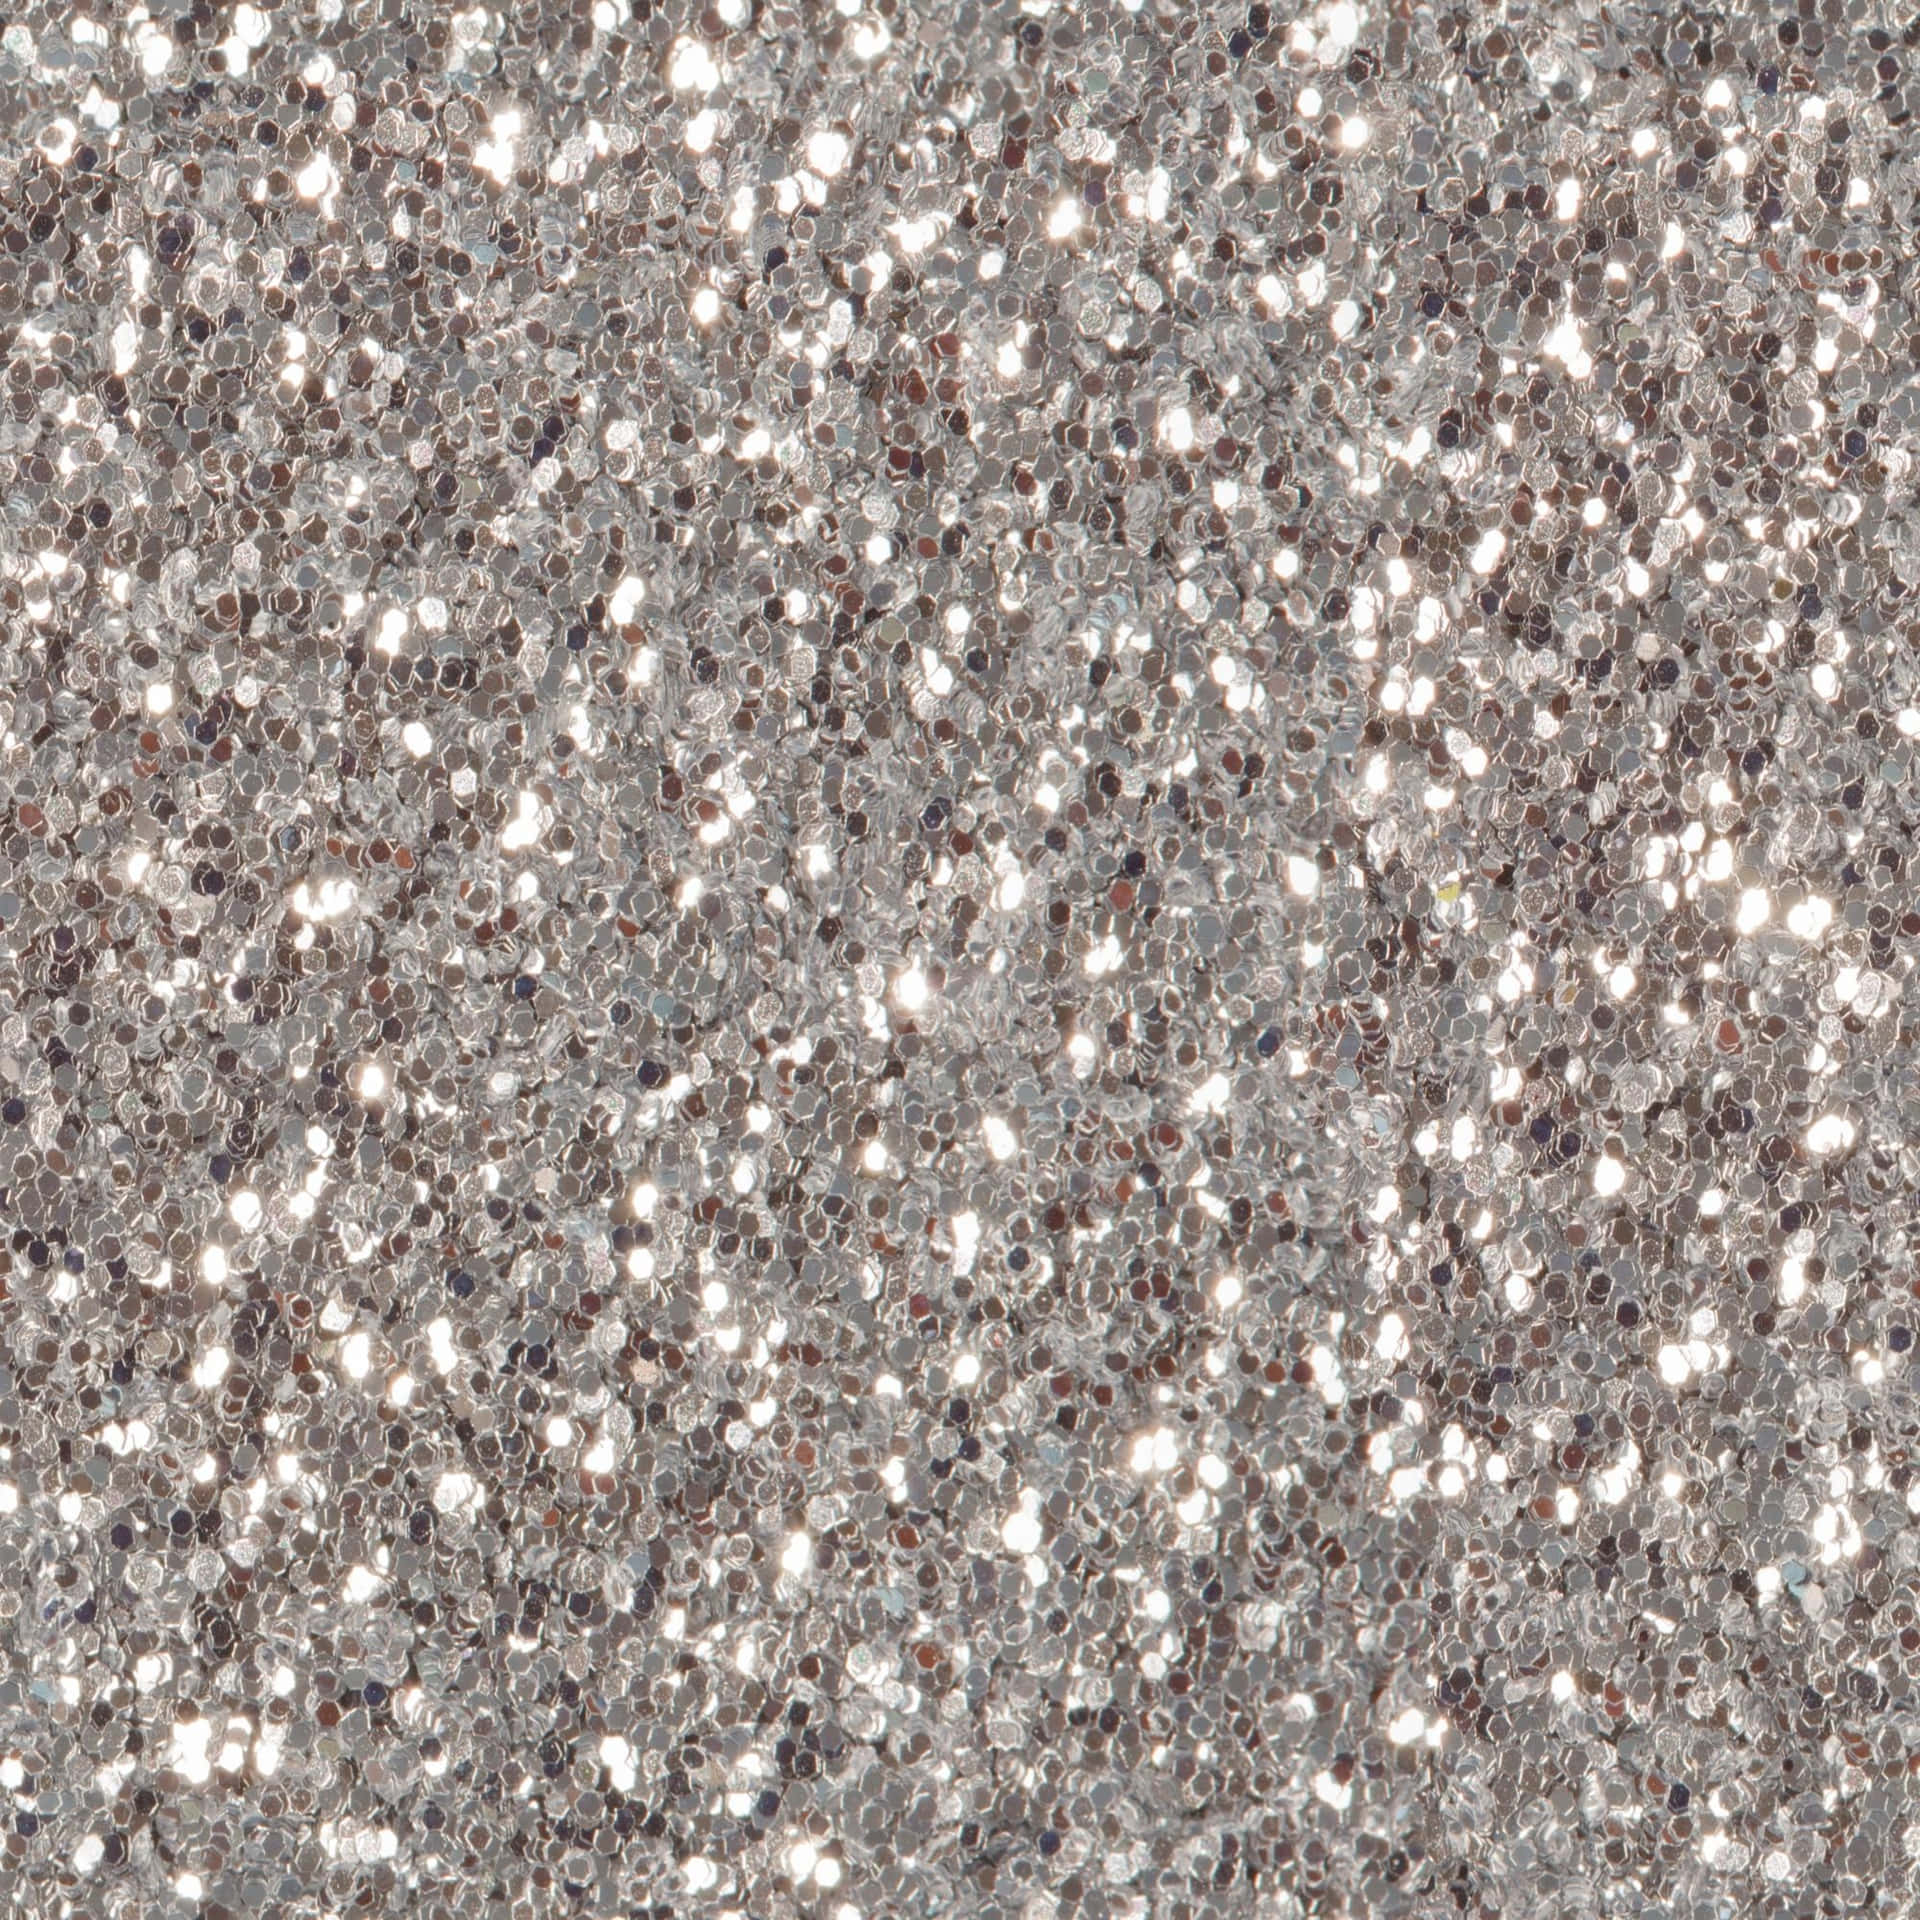 A shimmering silver glitter background for art projects, digital displays and more.